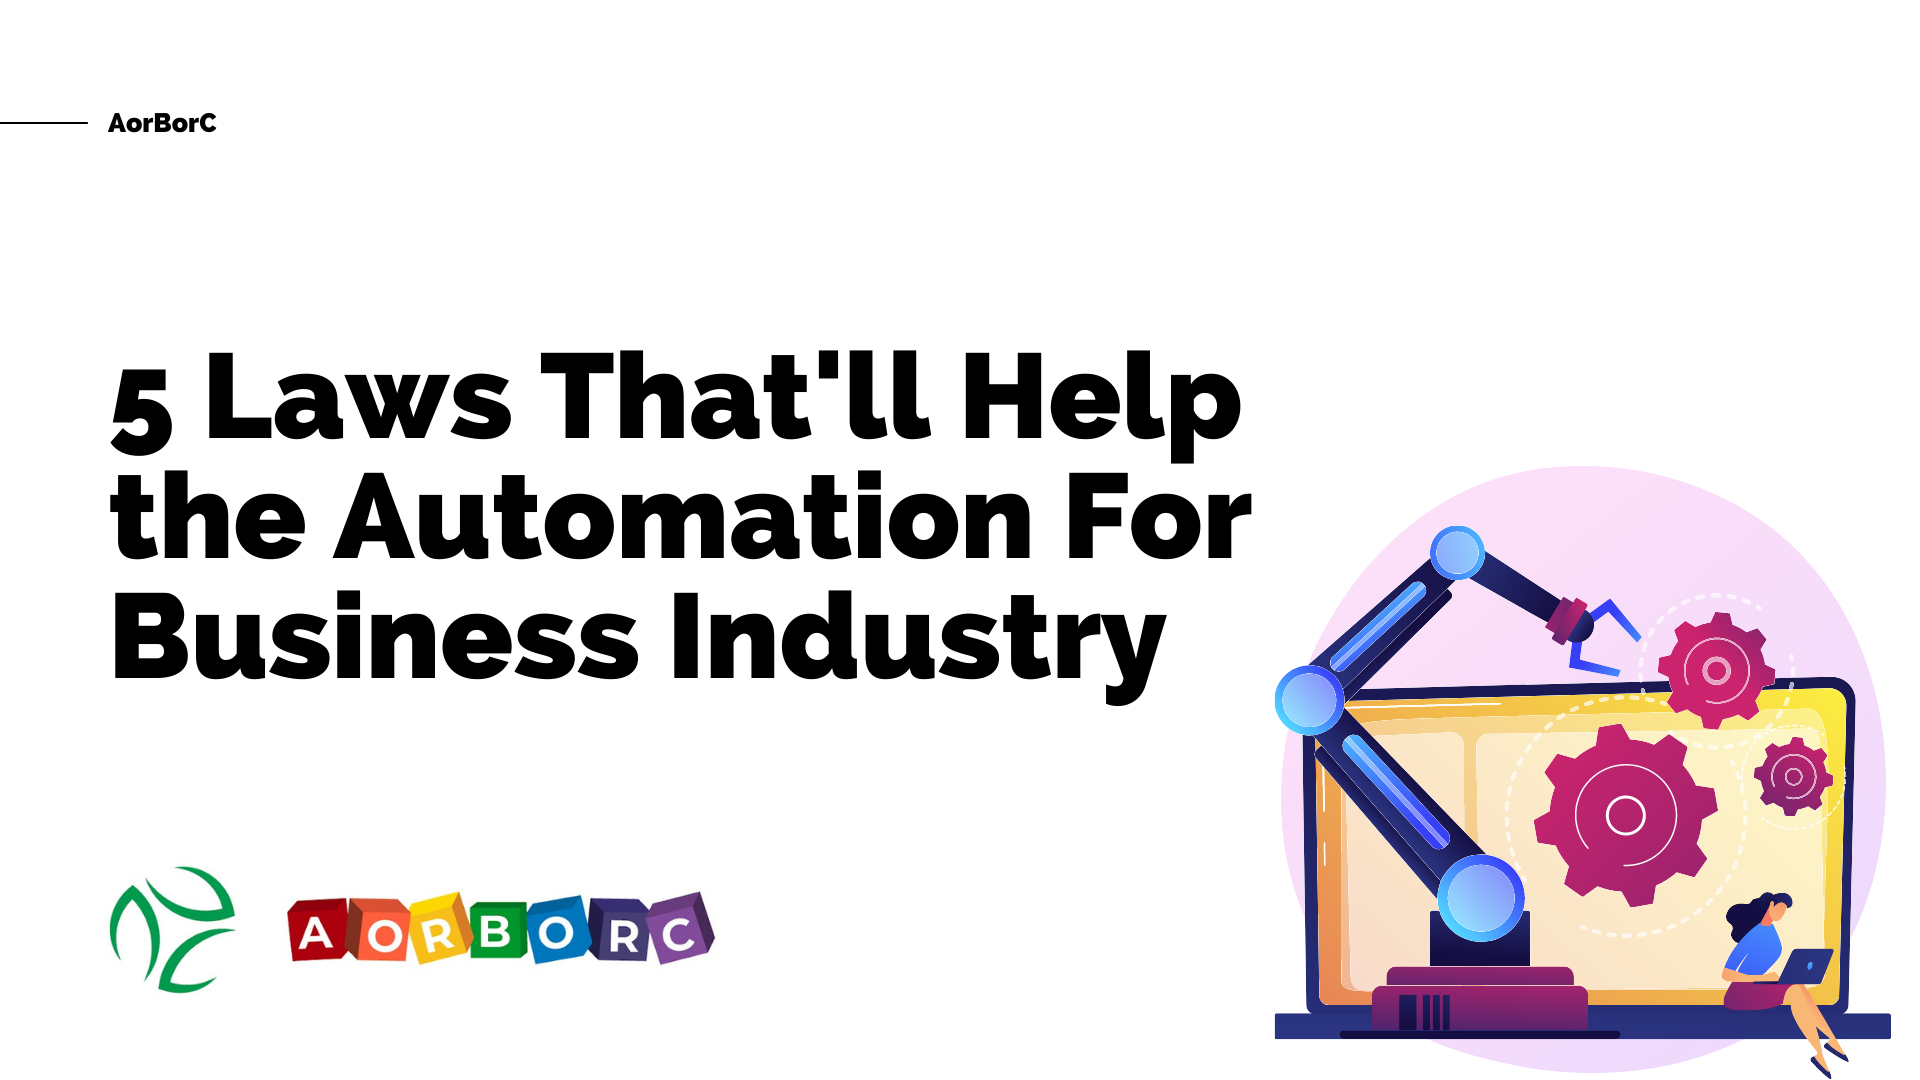 5 Laws That’ll Help the Automation For Business Industry